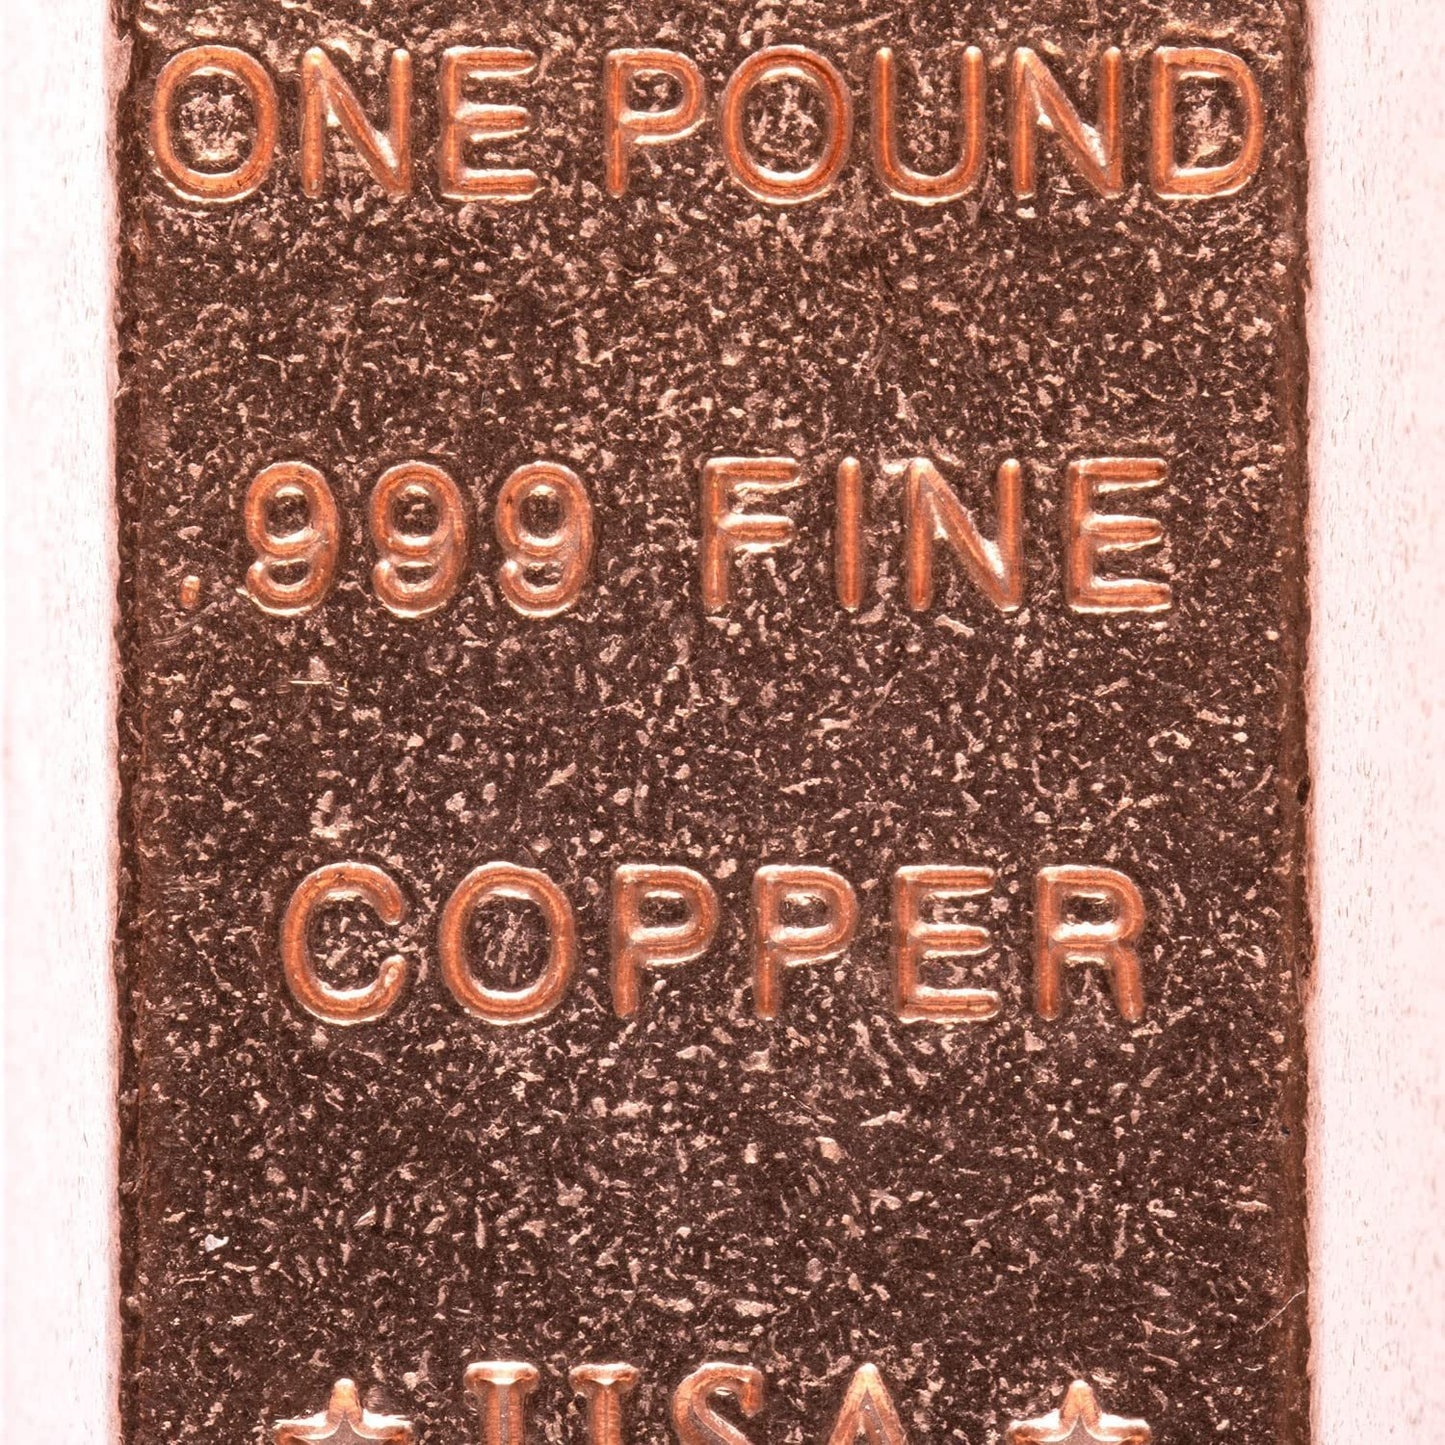 1 Pound Copper Bullion Bar Ingot Paperweight - 999 Pure Chemistry Element Design with Certificate of Authenticity